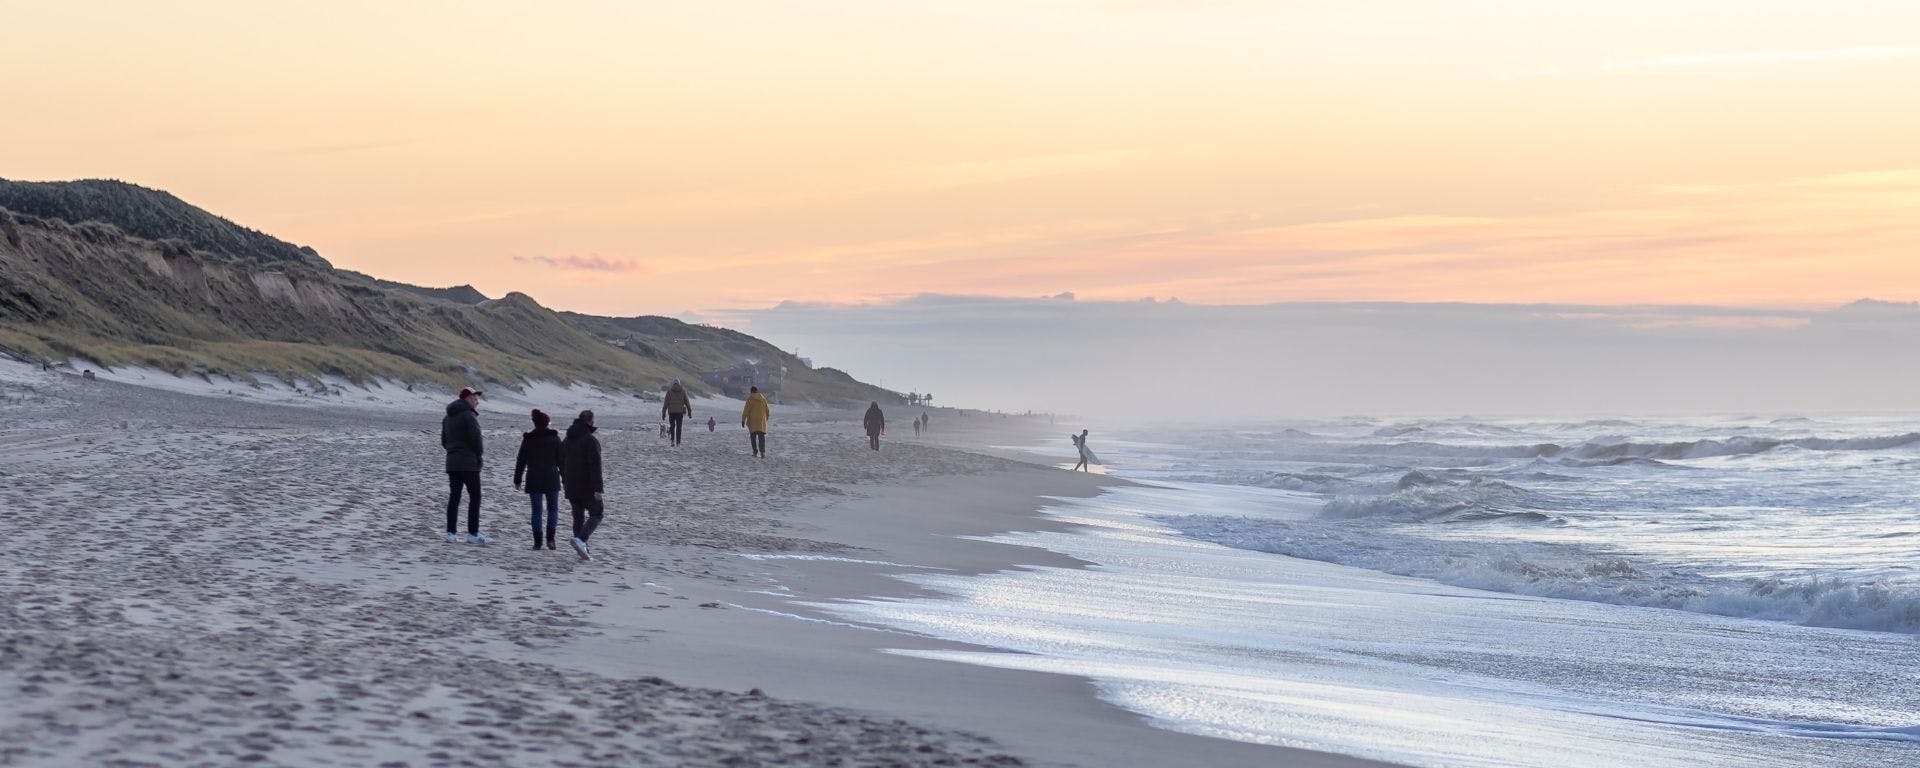 Coworking, Coliving and Surfing in Sylt (Germany)